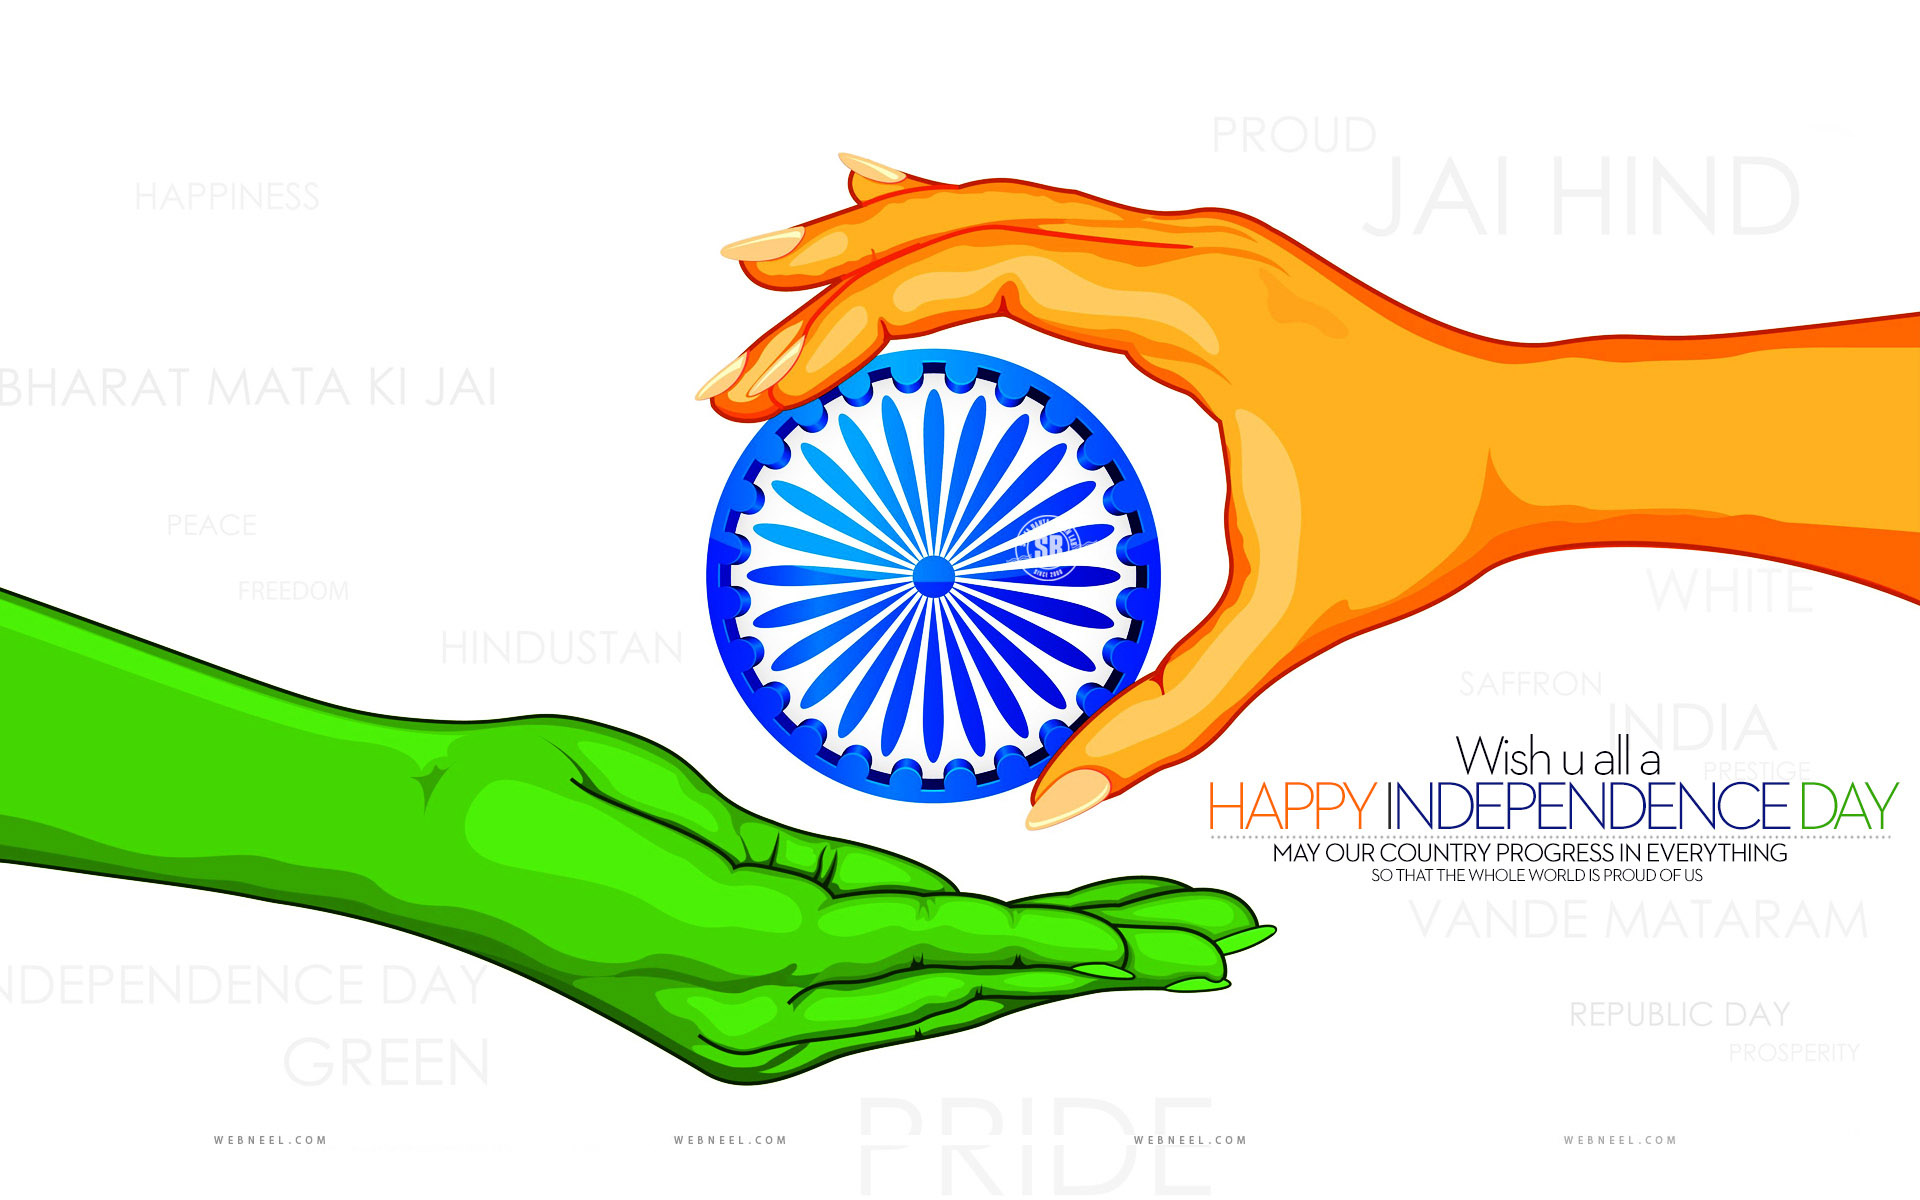 Happy Independence Day 2019